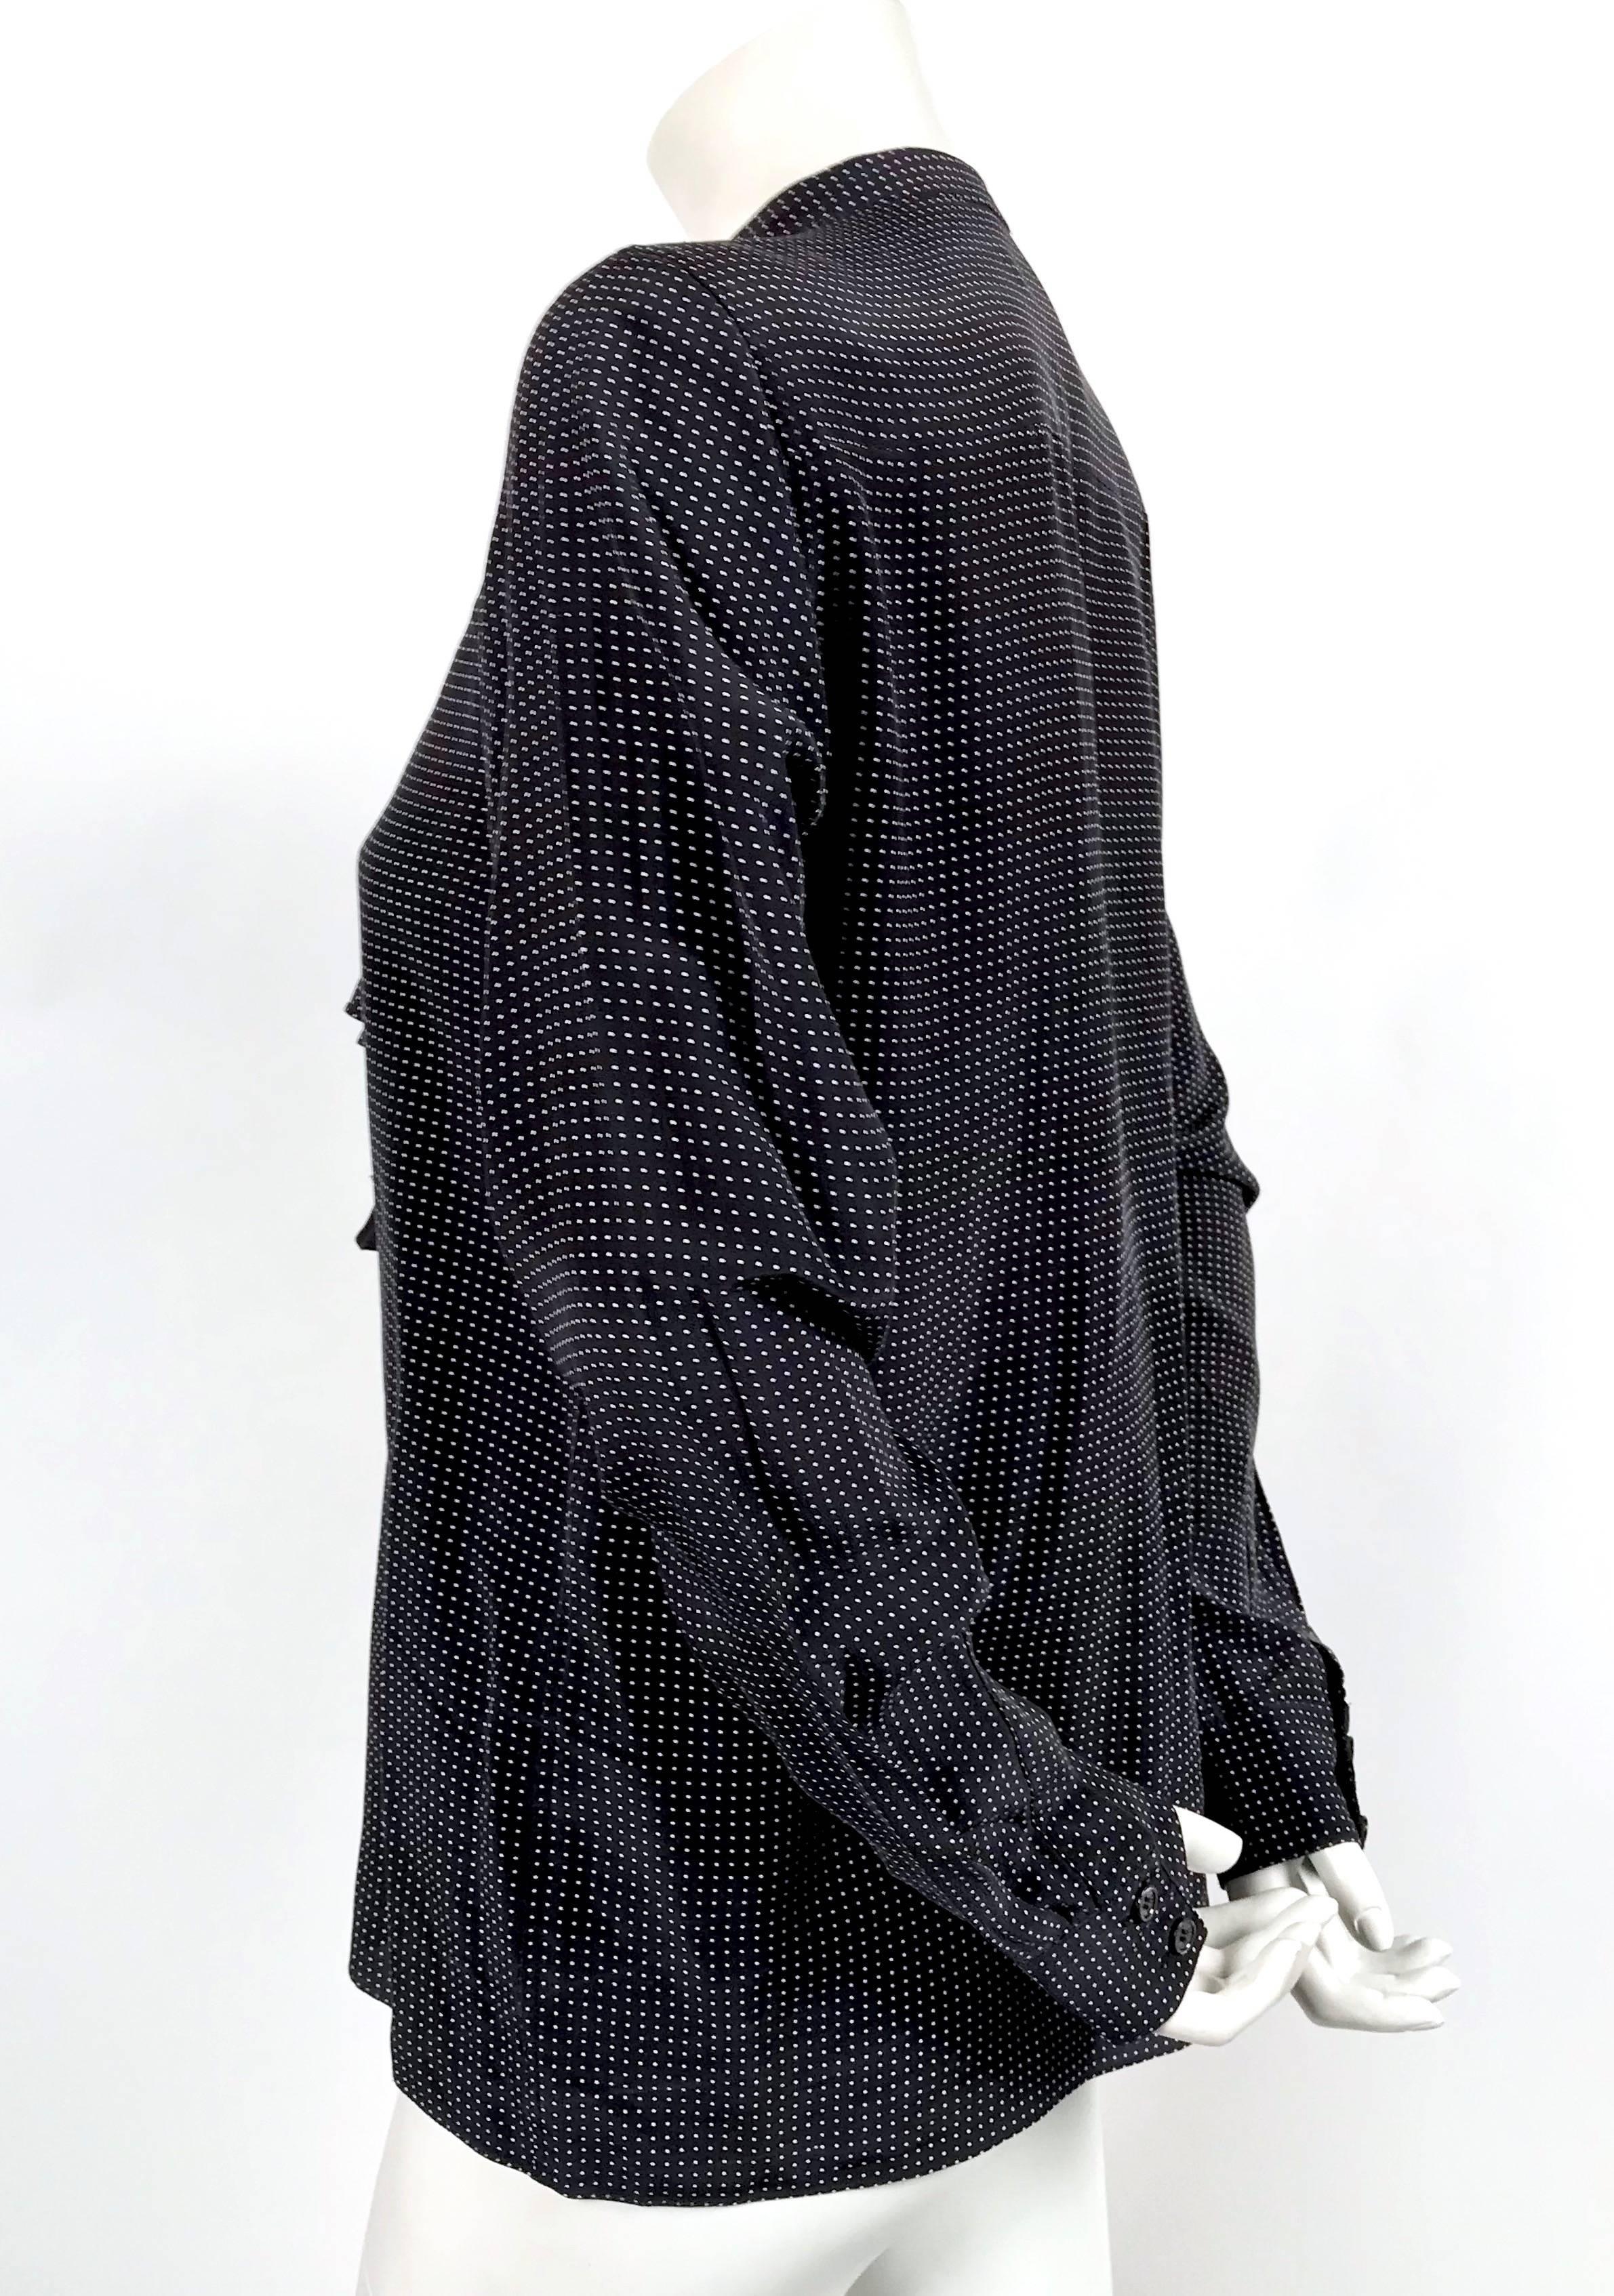 Soft black silk shirt with draped shoulder designed by Phoebe Philo for Celine dating to 2010. French size 38. Approximate measurements: shoulder 15